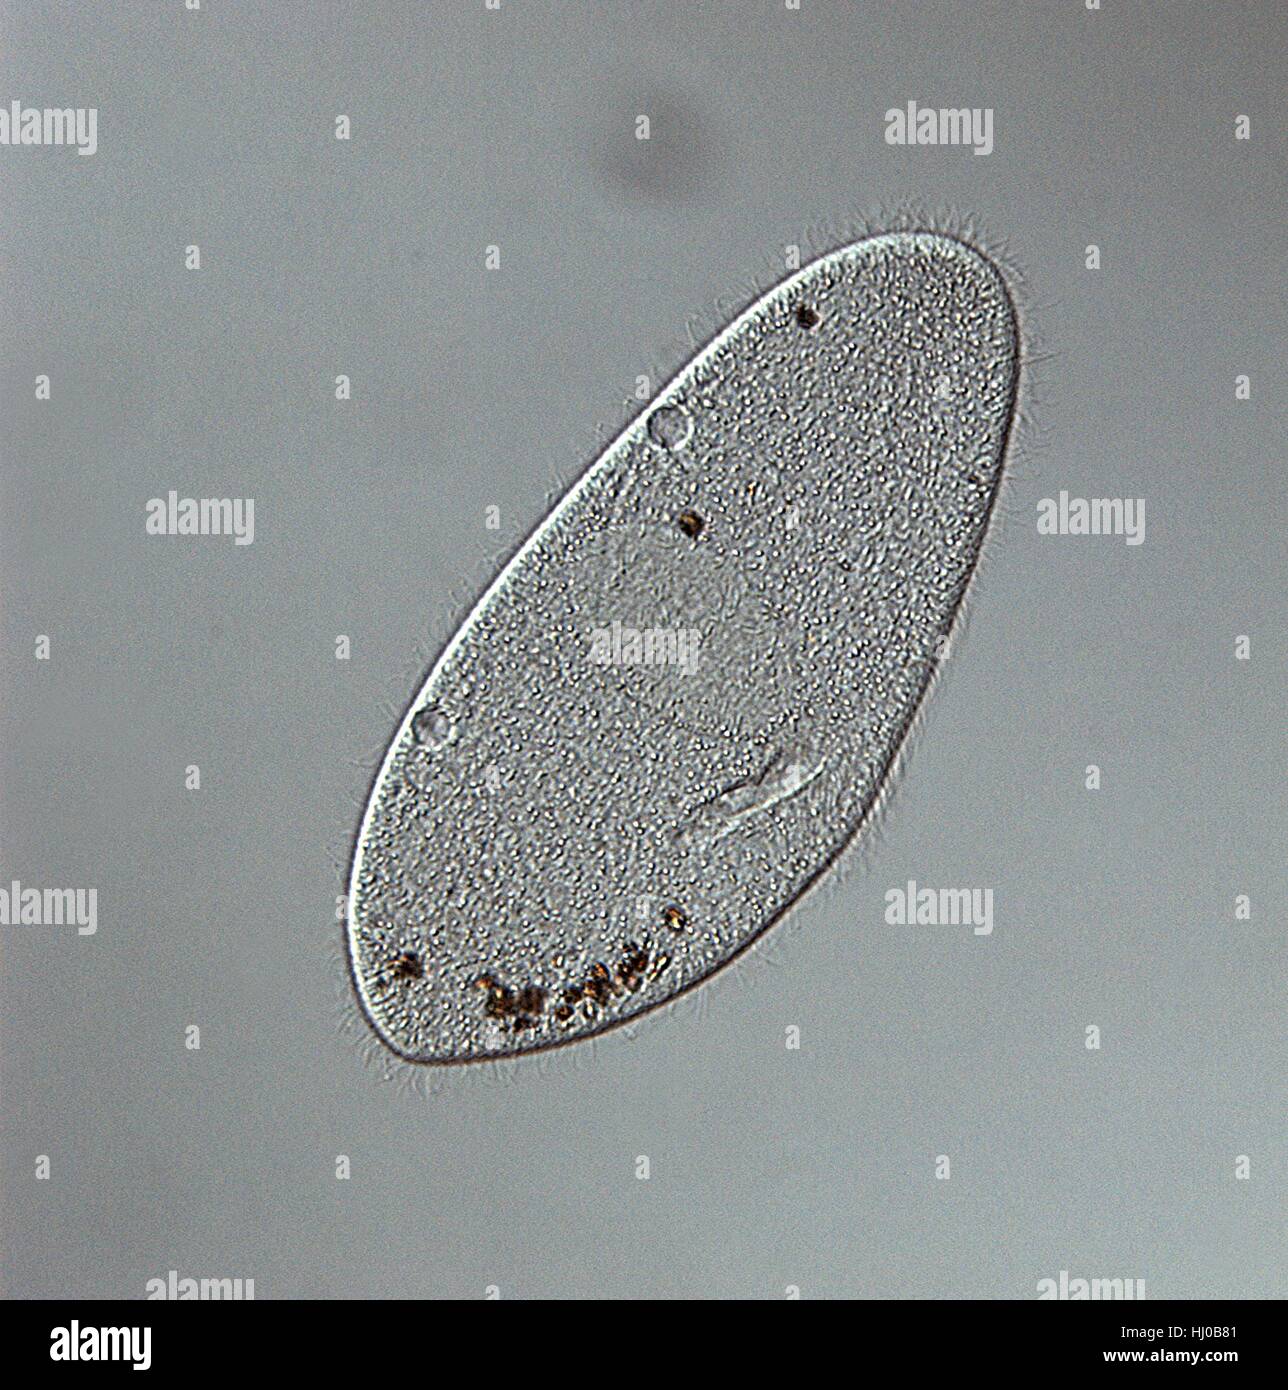 Phase contrast light micrograph of Paramecium.(Paramecium multimicronuleatum),a ciliate protozoan,with oral groove (right side of cell),no food vacuoles,two contractile vacuoles (left side of cell; no radiating channels),nucleus (centre) cilia.Paramecium are found mainly in stagnant ponds,feeding Stock Photo